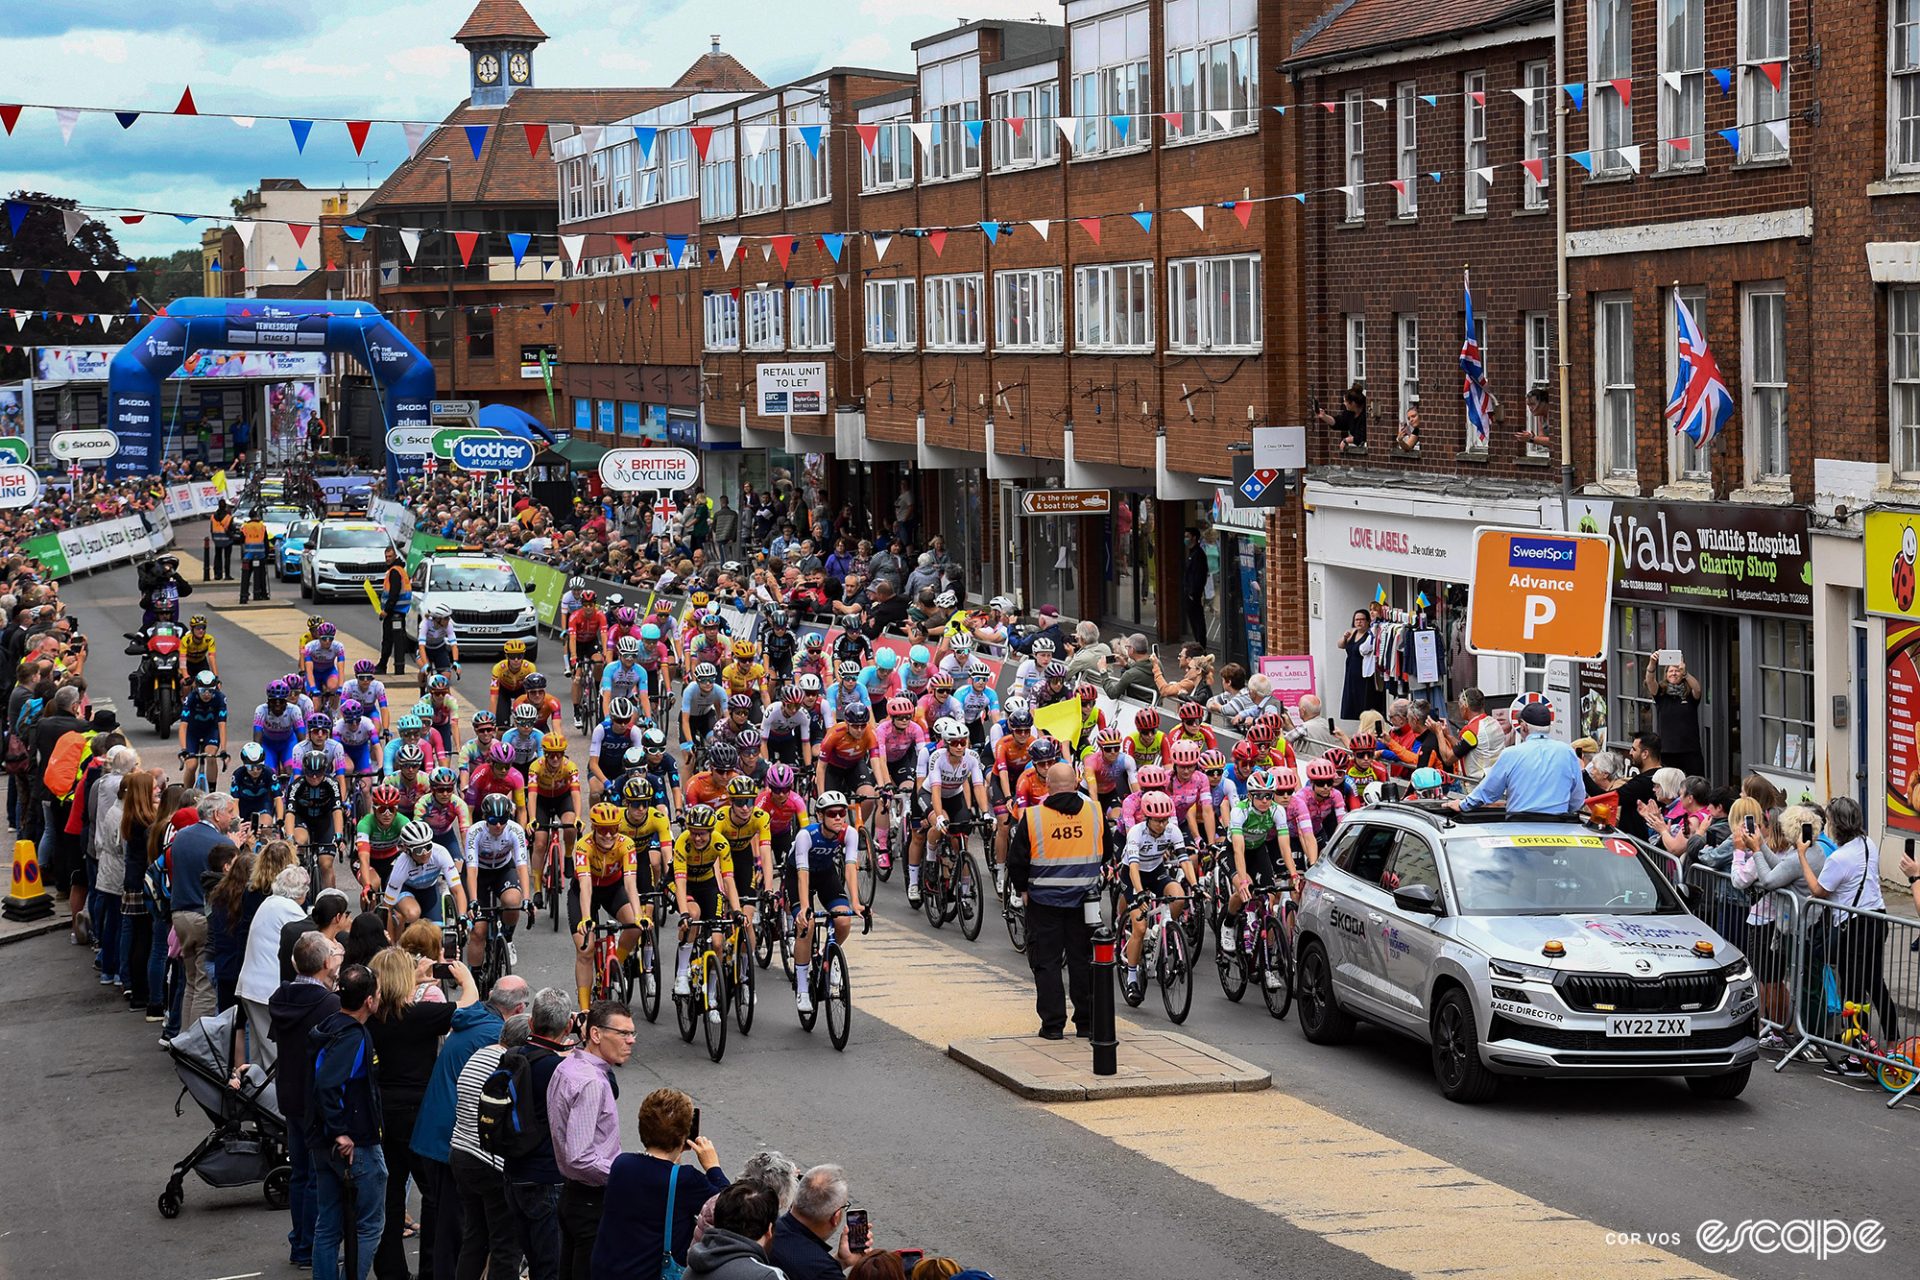 The 2022 Women's Tour starts in Tewkesbury on stage 3. The pack roll out behind the race director's car in a downtown area with fans lining both sides of the road.